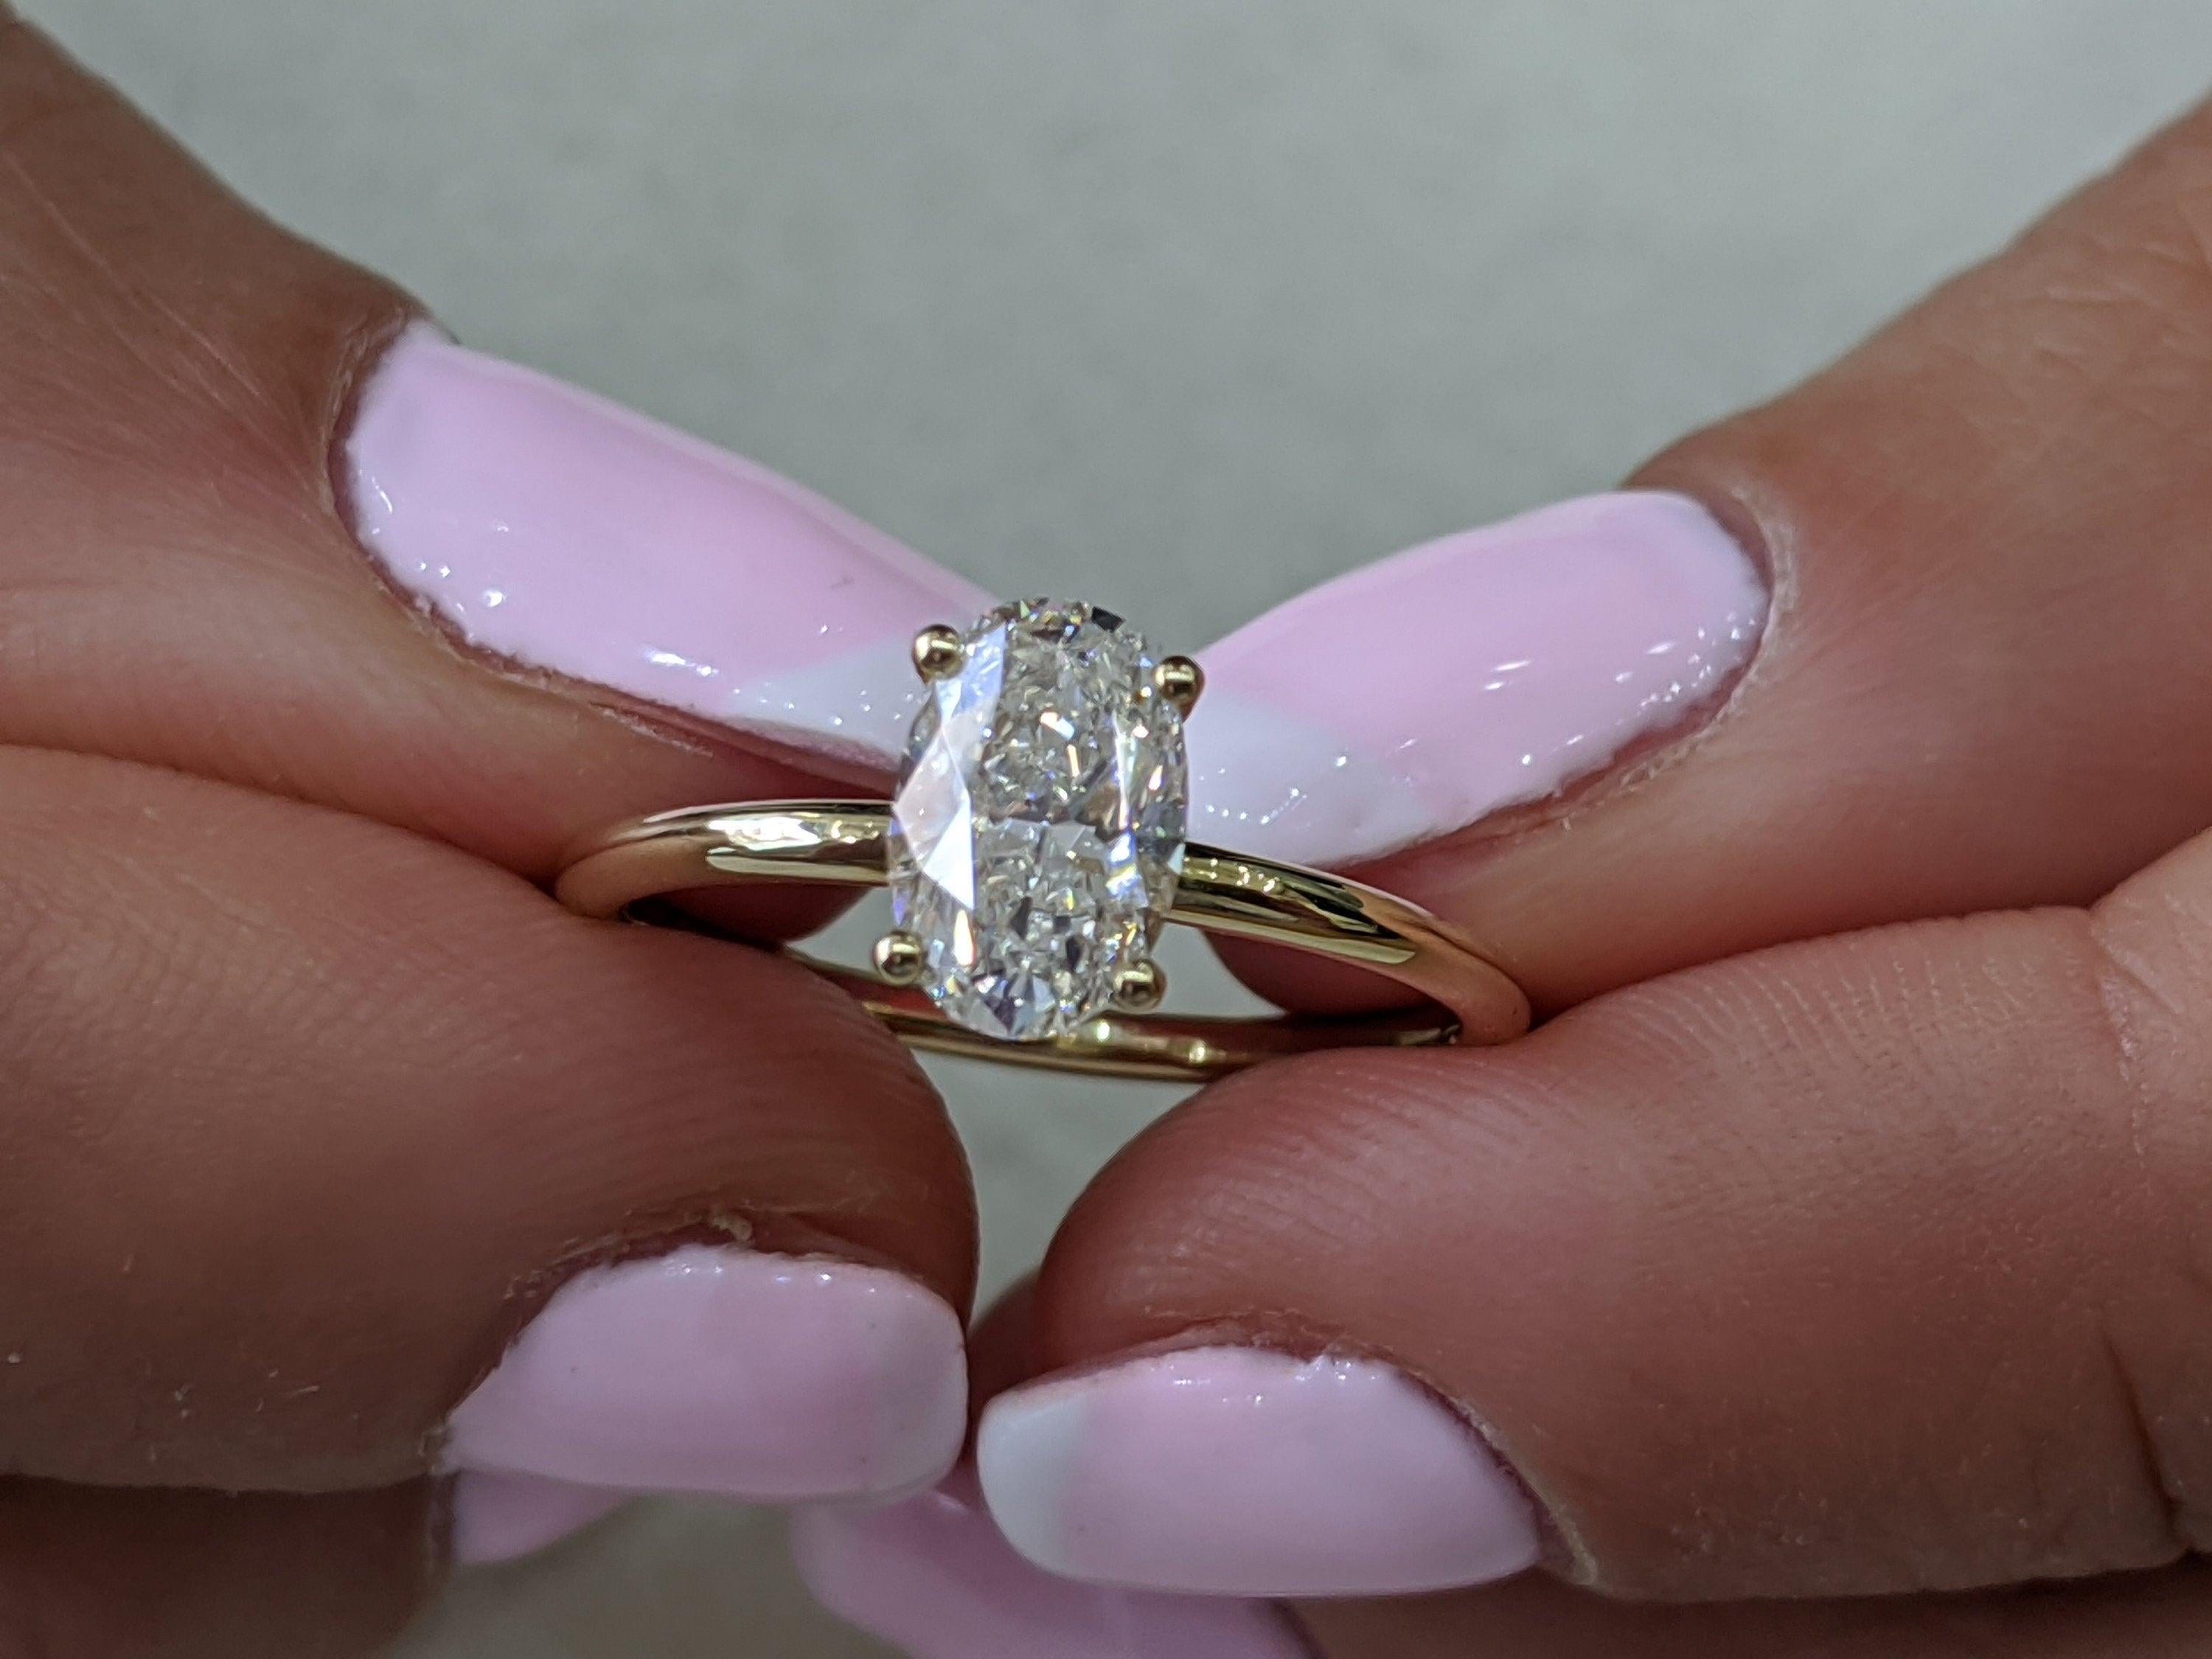 1 Carat Engagement Ring, Oval Diamond Ring, Oval Engagement Ring, Oval Shape Solitaire, Yellow Gold Promise Ring, Diamond Engagement Ring
 
 Main Stone Name: Natural Earth Mined Diamond 
 Main Stone Weight: 1.00 ct.
 Main Stone Clarity: SI1
 Main